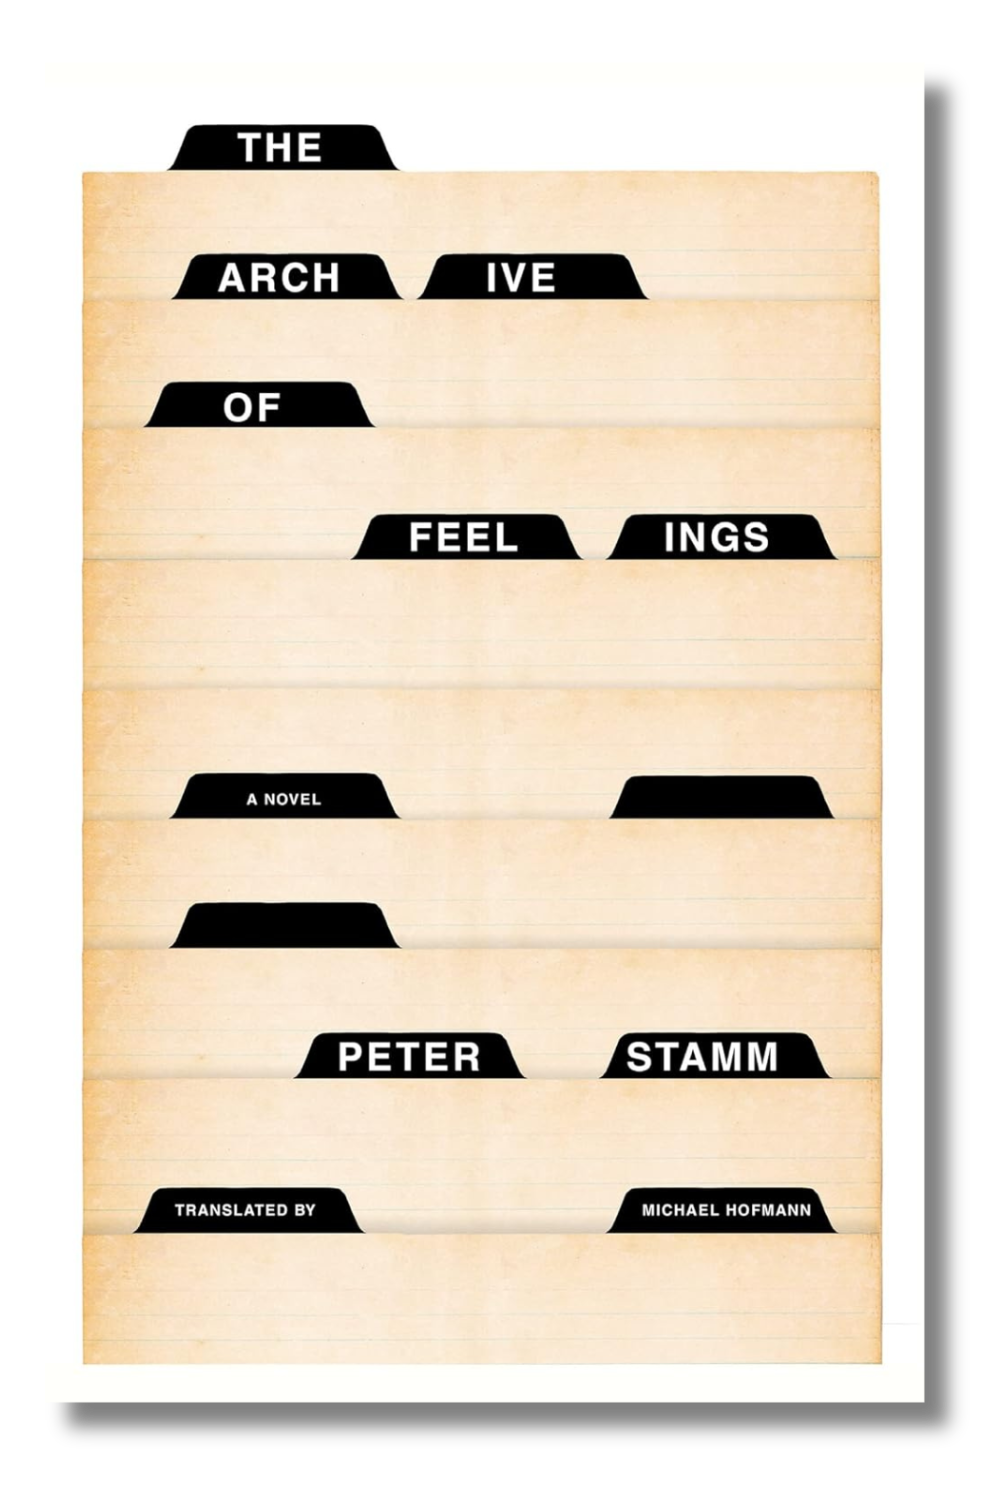 The cover of "The Archive of Feelings" by Peter Stamm, tr. by Michael Hofmann